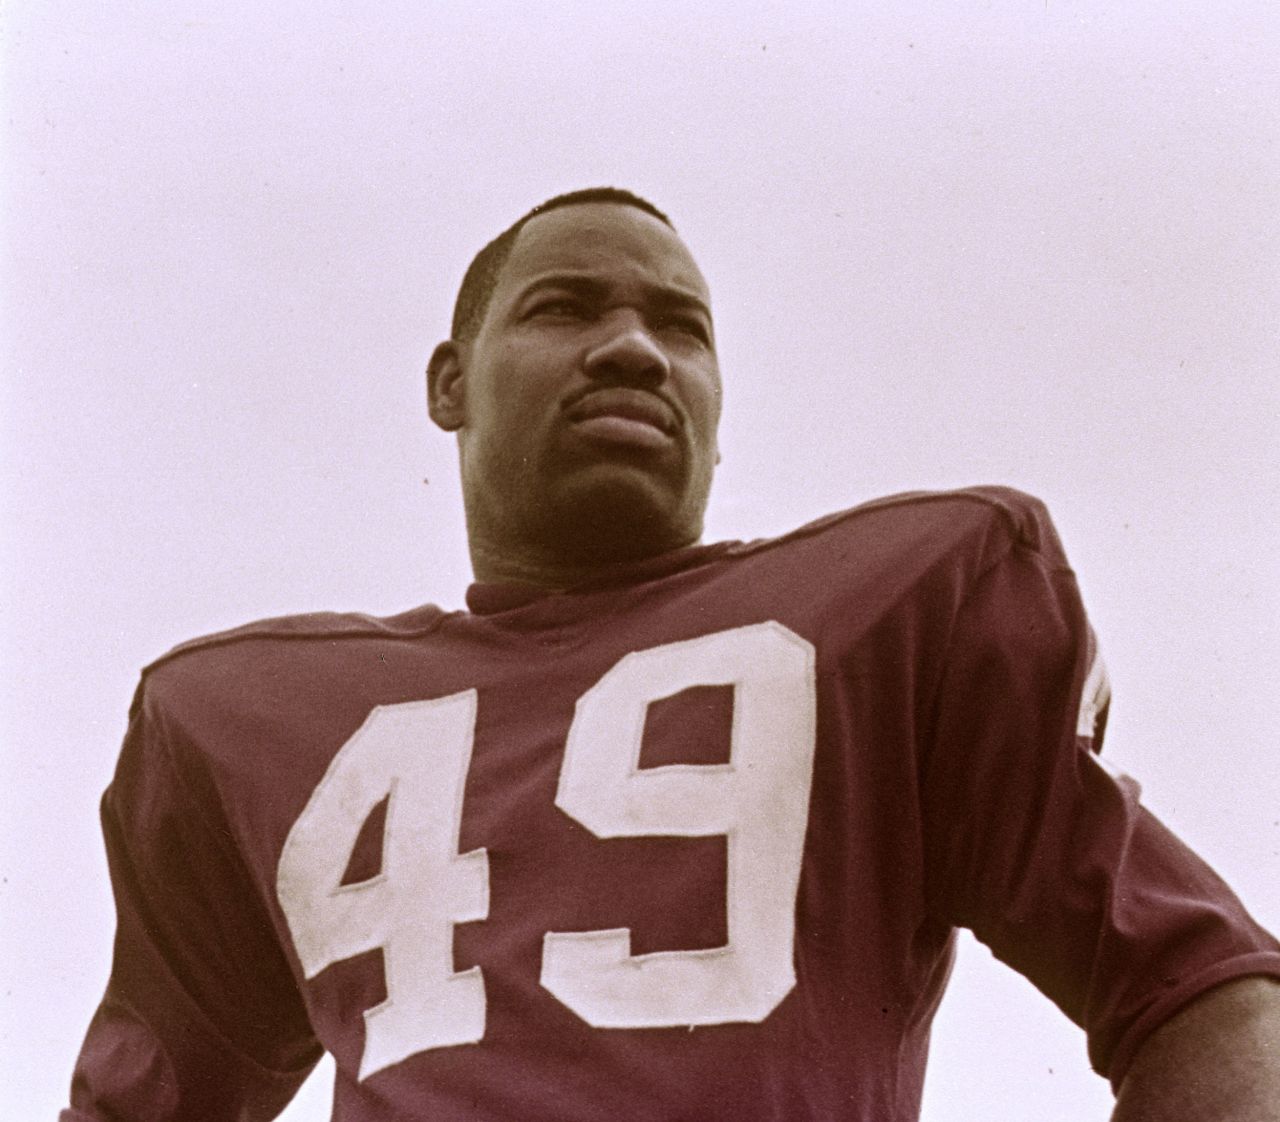 NFL Hall of Famer <a href="https://www.cnn.com/2020/04/06/us/bobby-mitchell-nfl-obit-spt/index.html" target="_blank">Bobby Mitchell</a>, who became the first African American to play for the Washington Redskins, died April 5, according to the Pro Football Hall of Fame. He was 84.